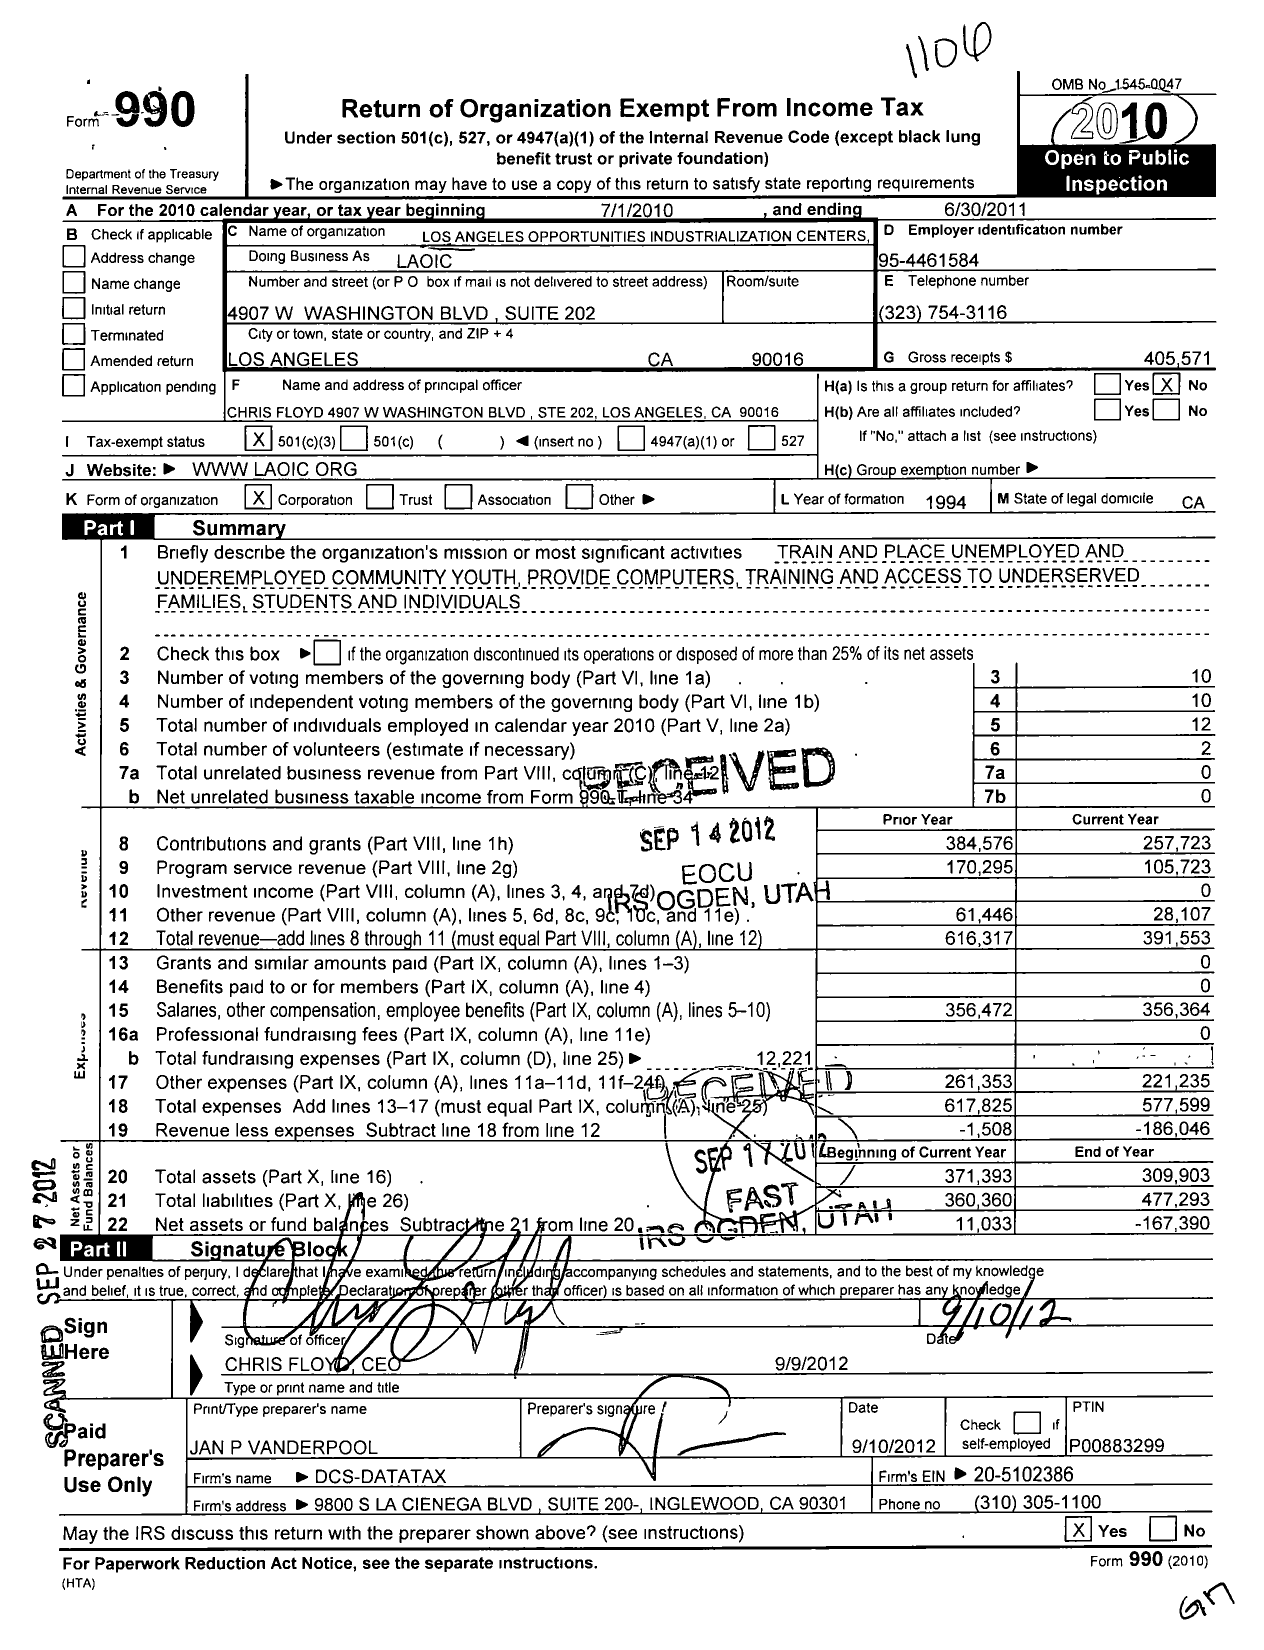 Image of first page of 2010 Form 990 for Los Angeles Opportunities Industrialization Centers (LAOIC)